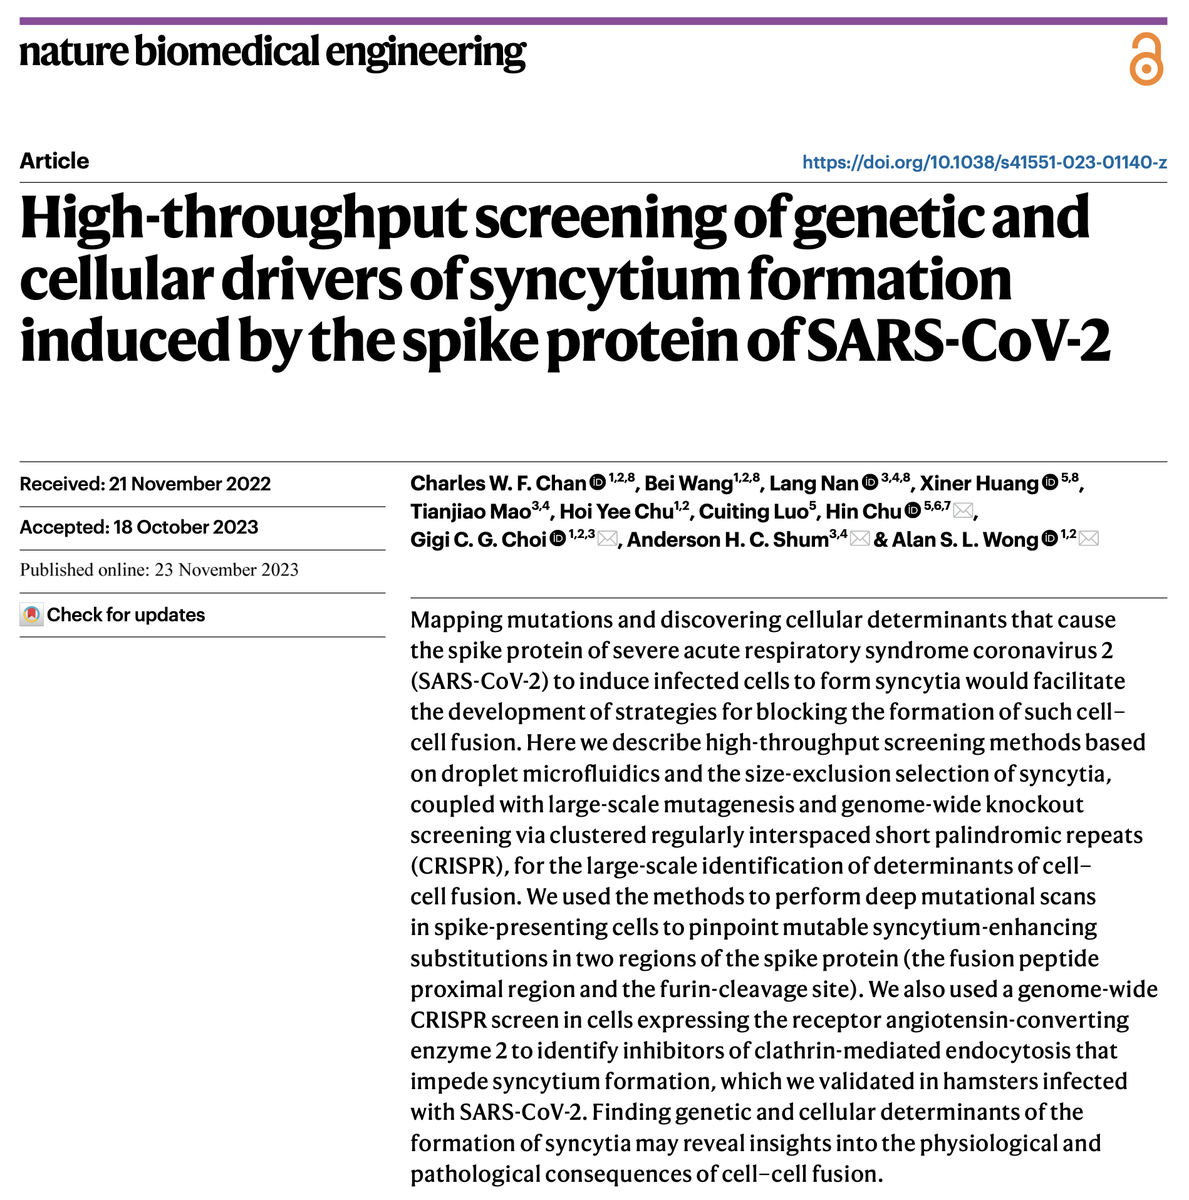 High-throughput screening of genetic and cellular drivers of syncytium formation induced by the spike protein of SARS-CoV-2 nature.com/articles/s4155…